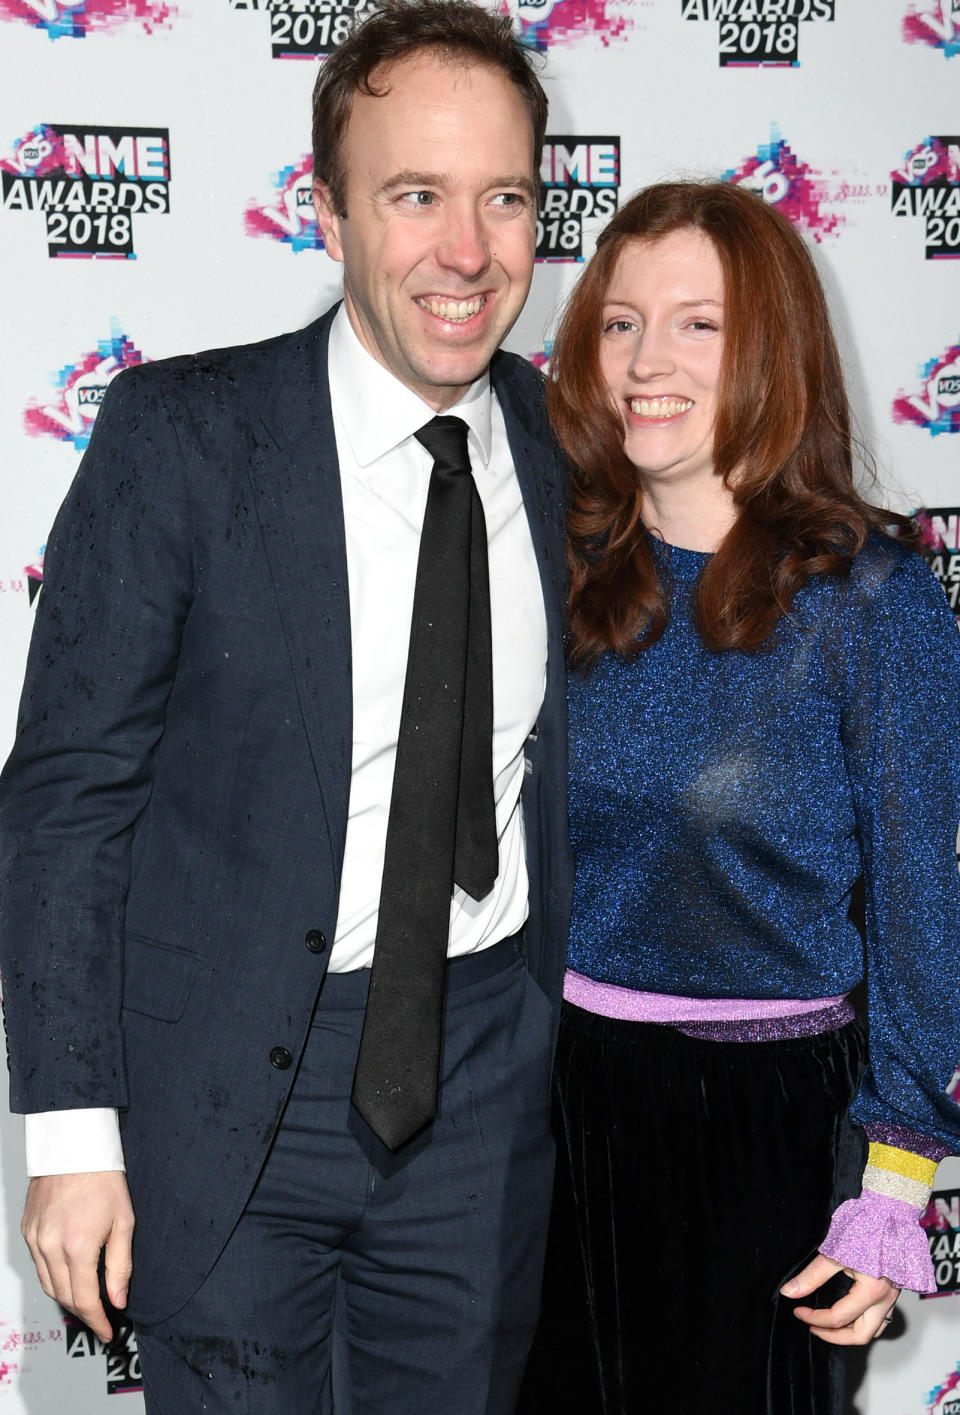 Secretary of State for Digital, Culture, Media and Sport Matt Hancock and his wife Martha attending the VO5 NME Awards 2018 held at the O2 Brixton Academy, London